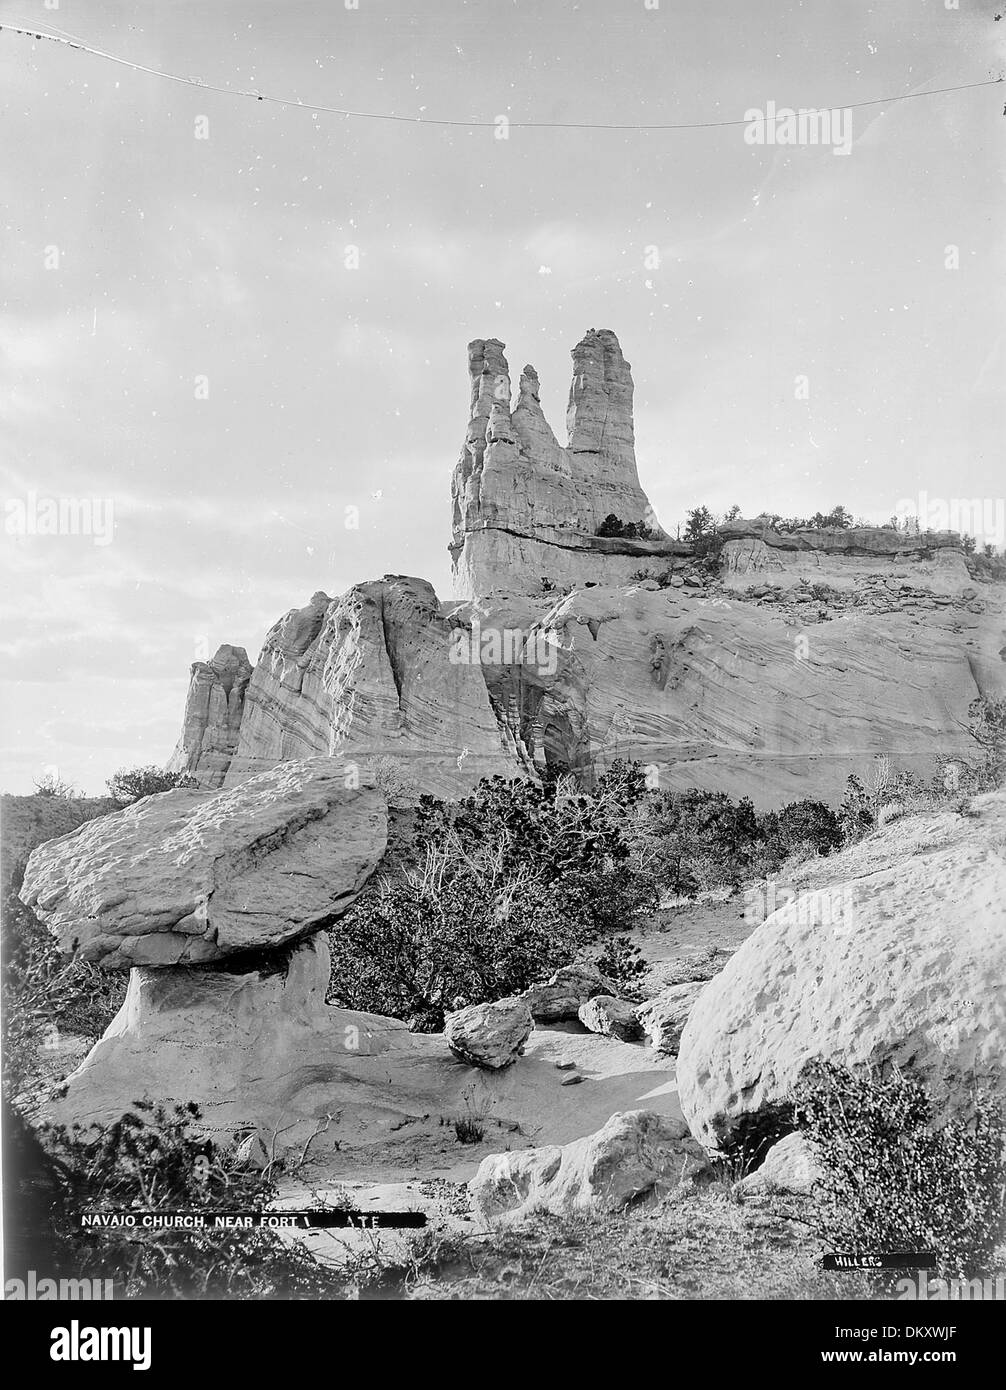 (Old No. 122) Navajo Church near Fort Wingate, McKinley County, New Mexico., 1871 - 1878 517770 Stock Photo